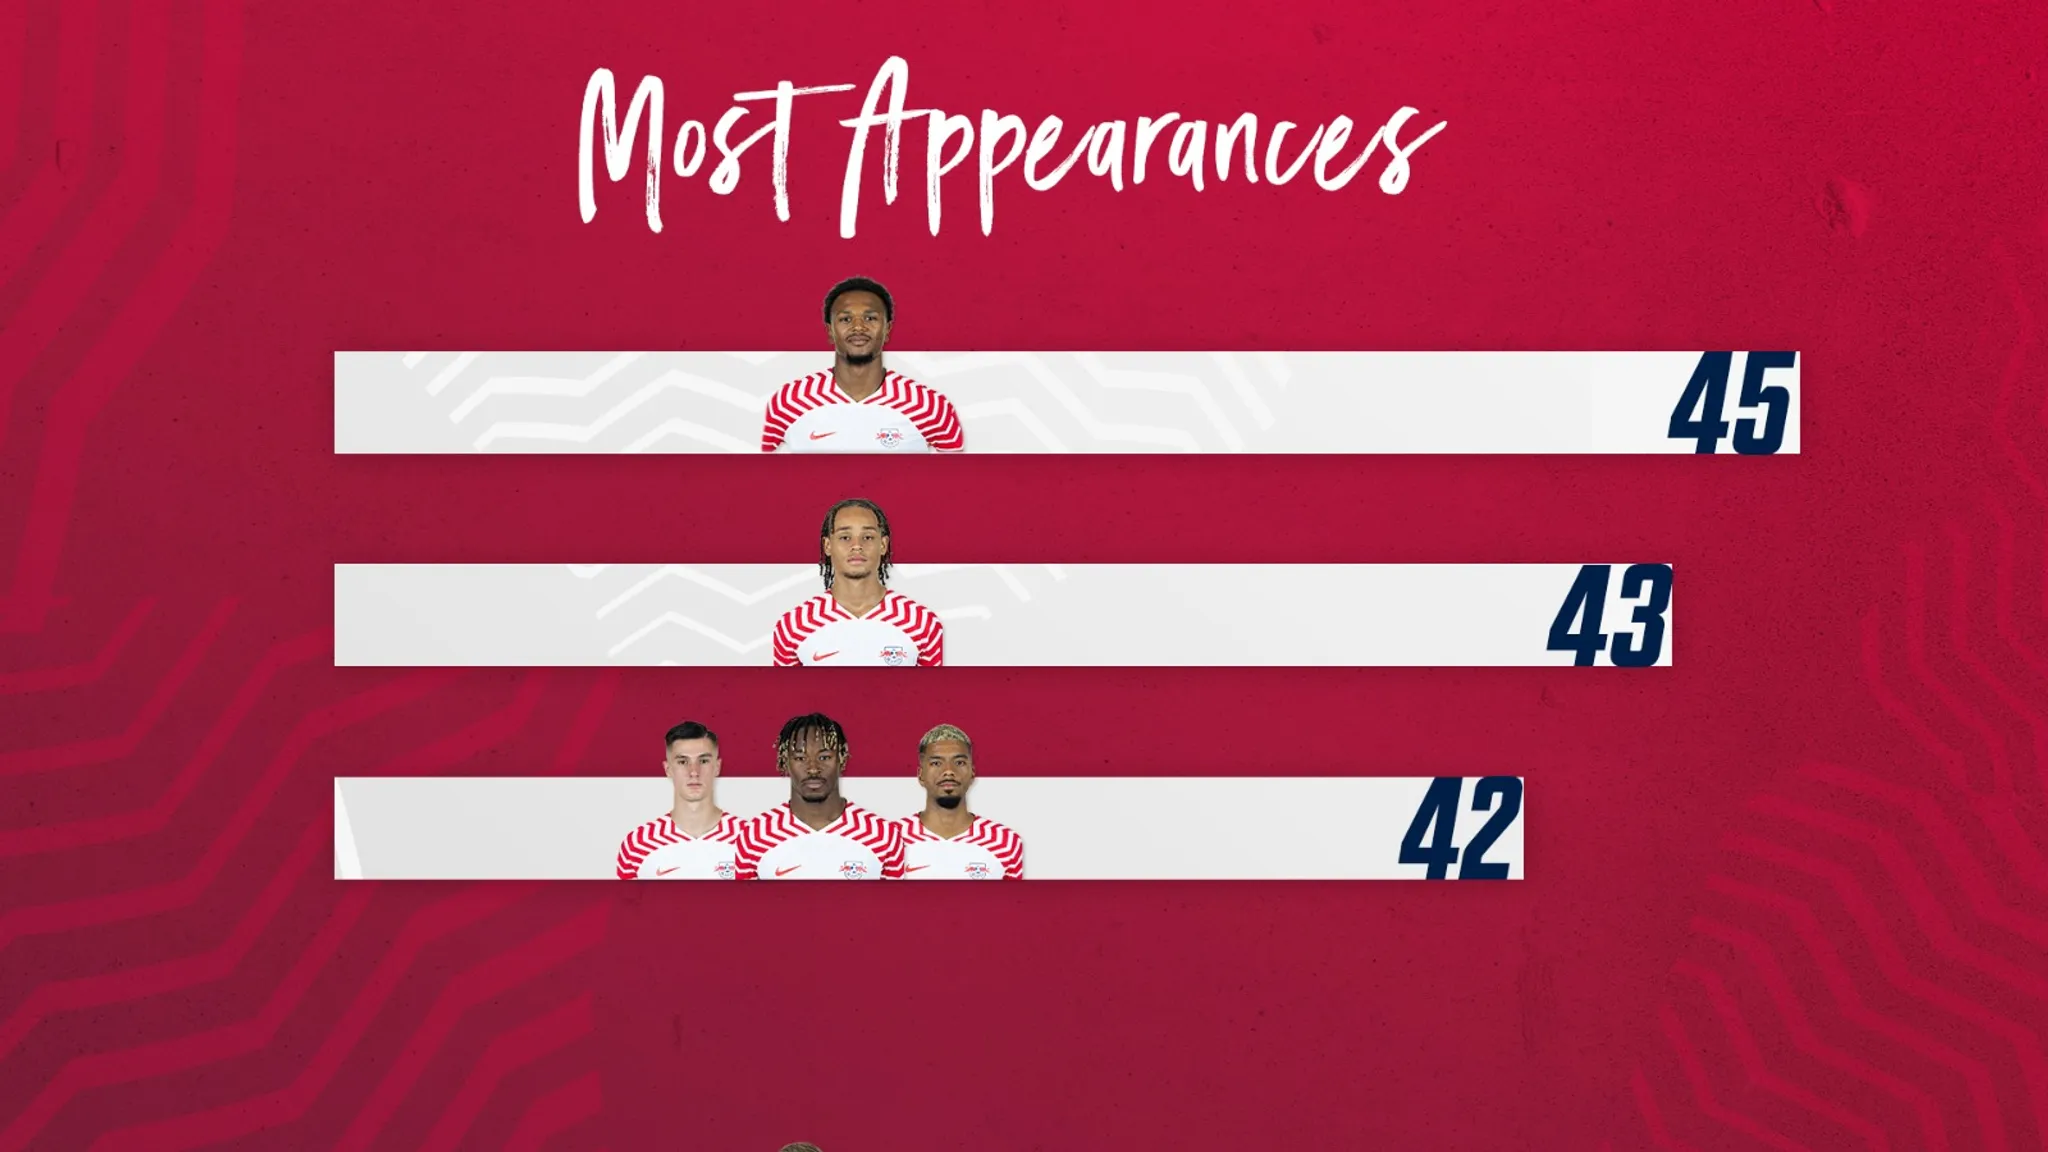 The players with the most appearances at a glance.